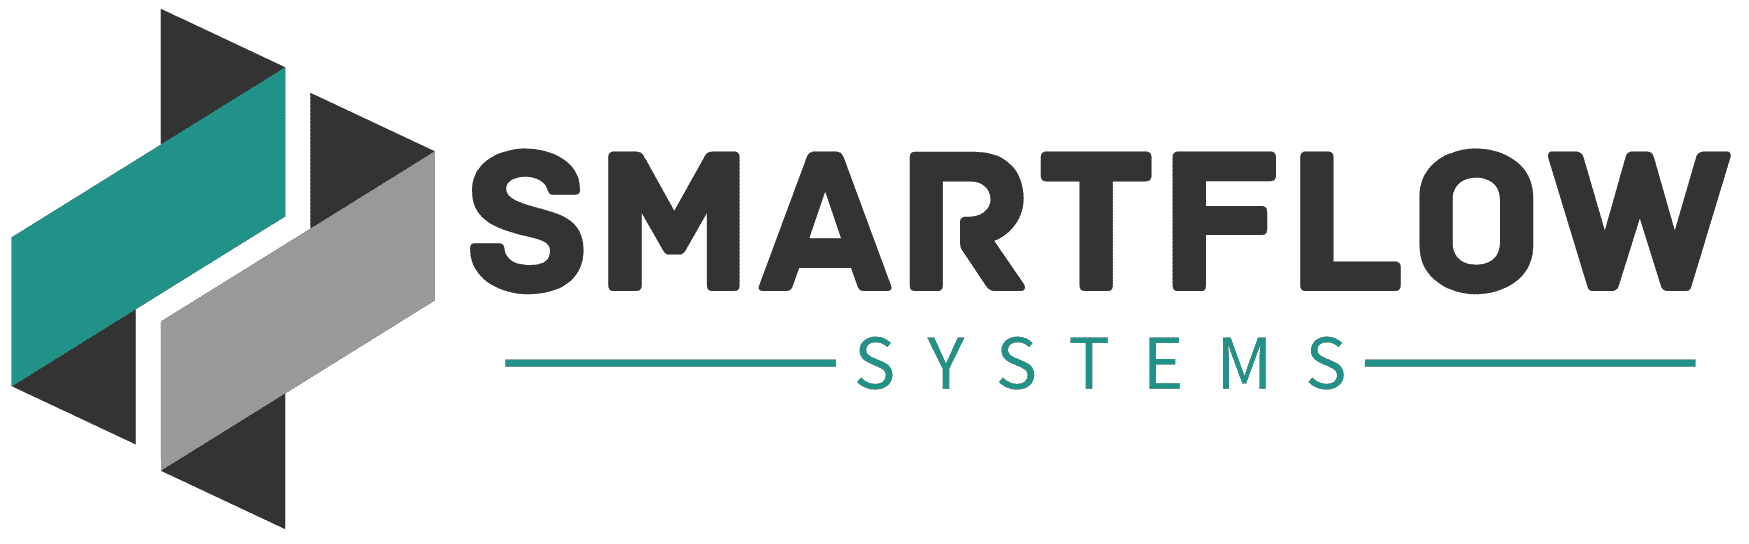 SmartFlow Systems - All-inclusive Reviews and Messaging Platform